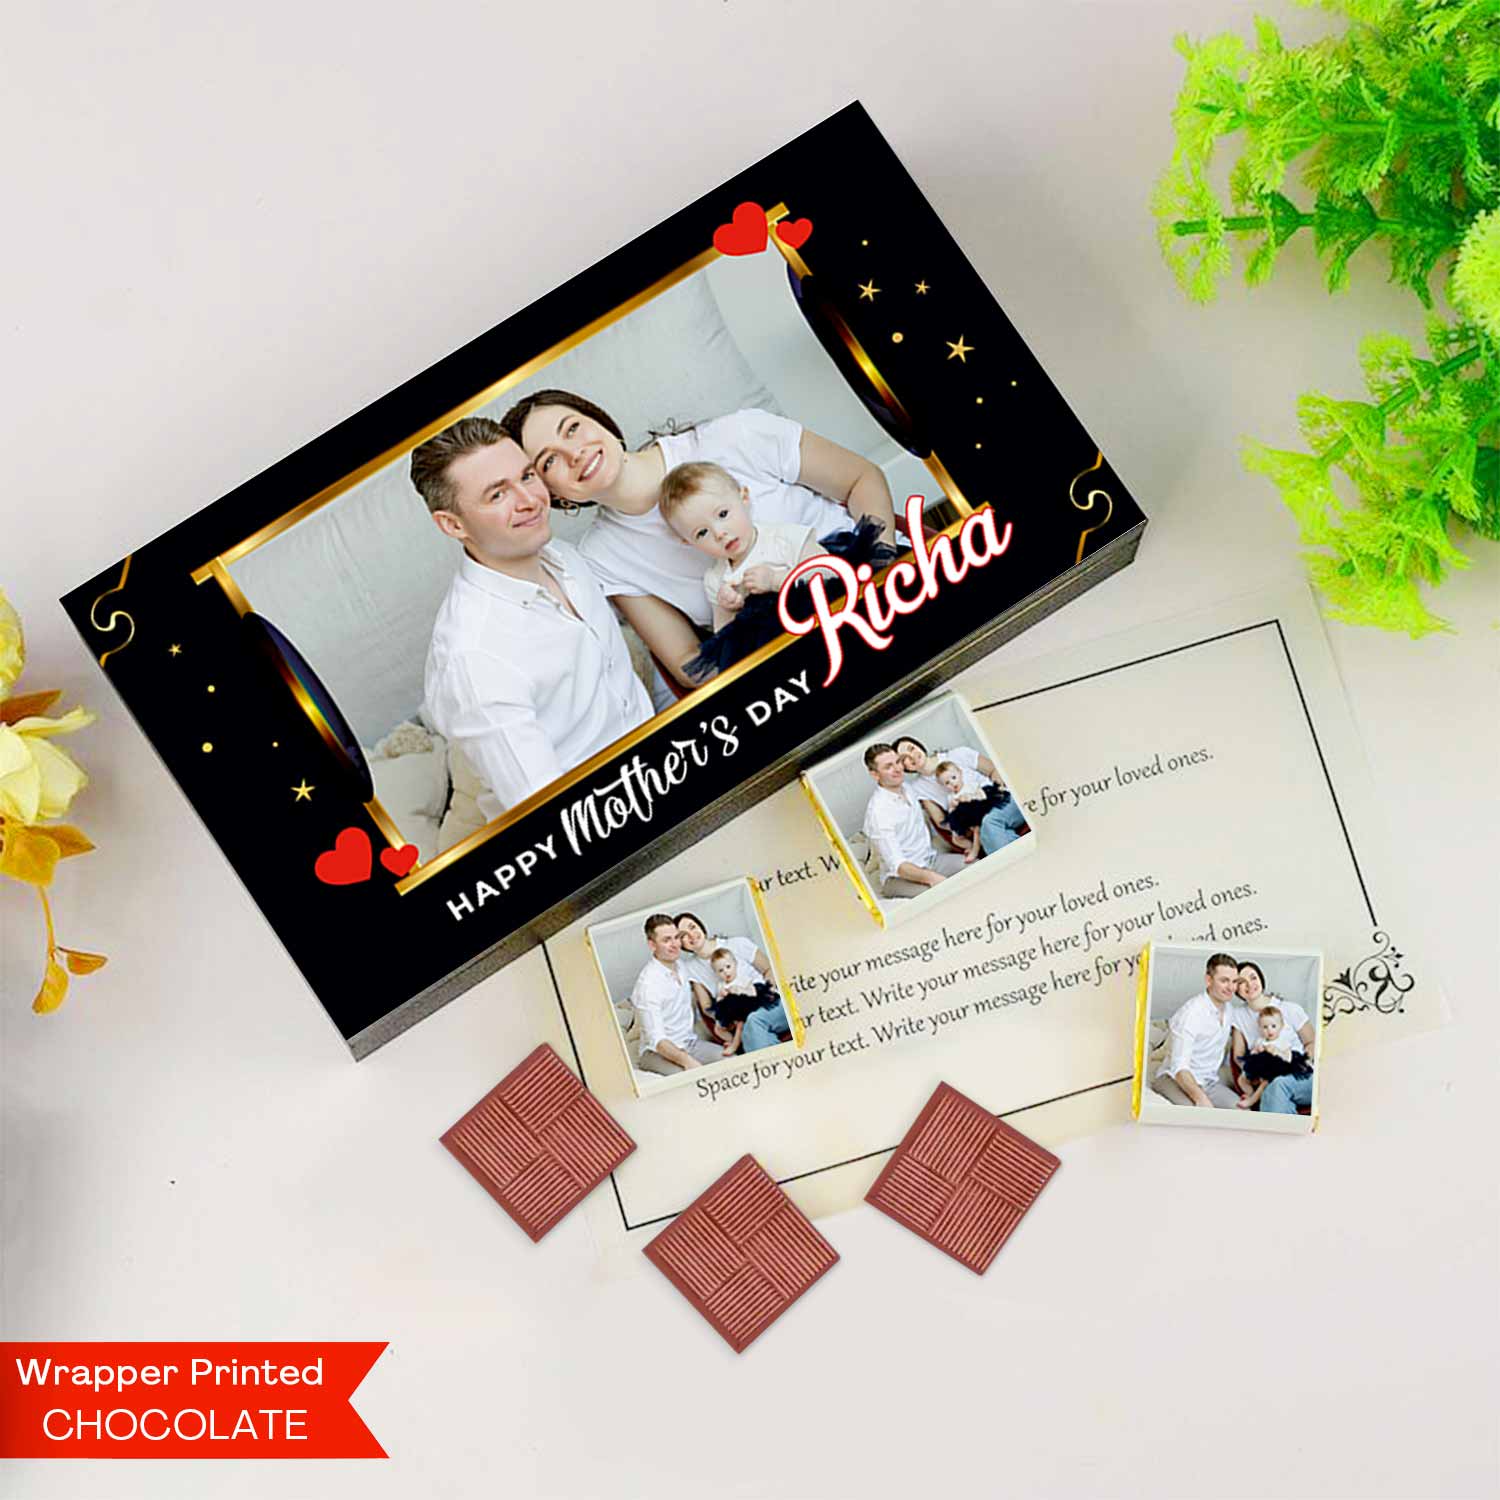 Delicate Dad Mom Baby Wrapper Printed Chocolate box